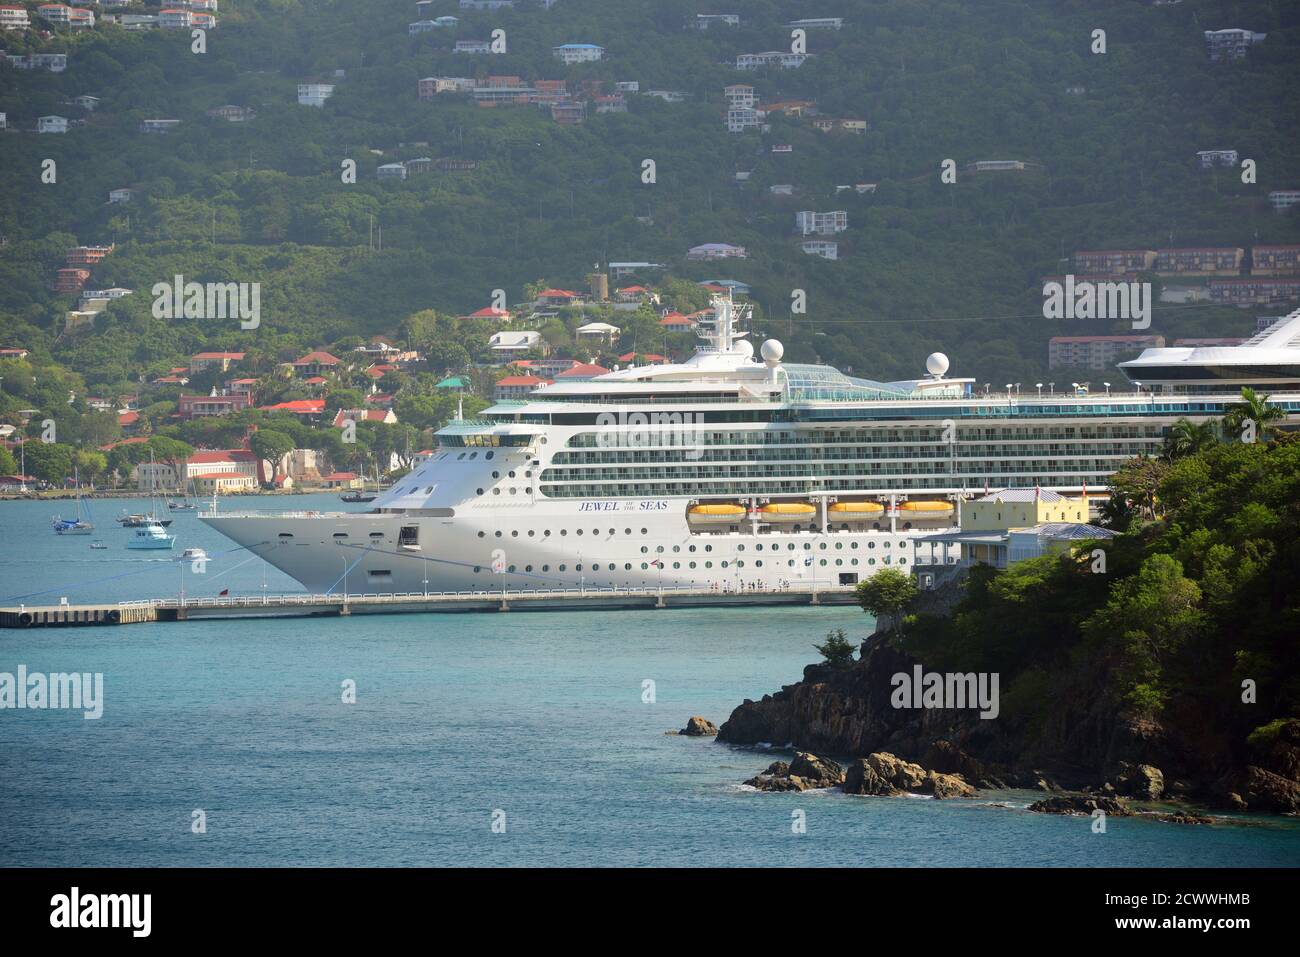 Where Does Royal Caribbean Dock In St Thomas